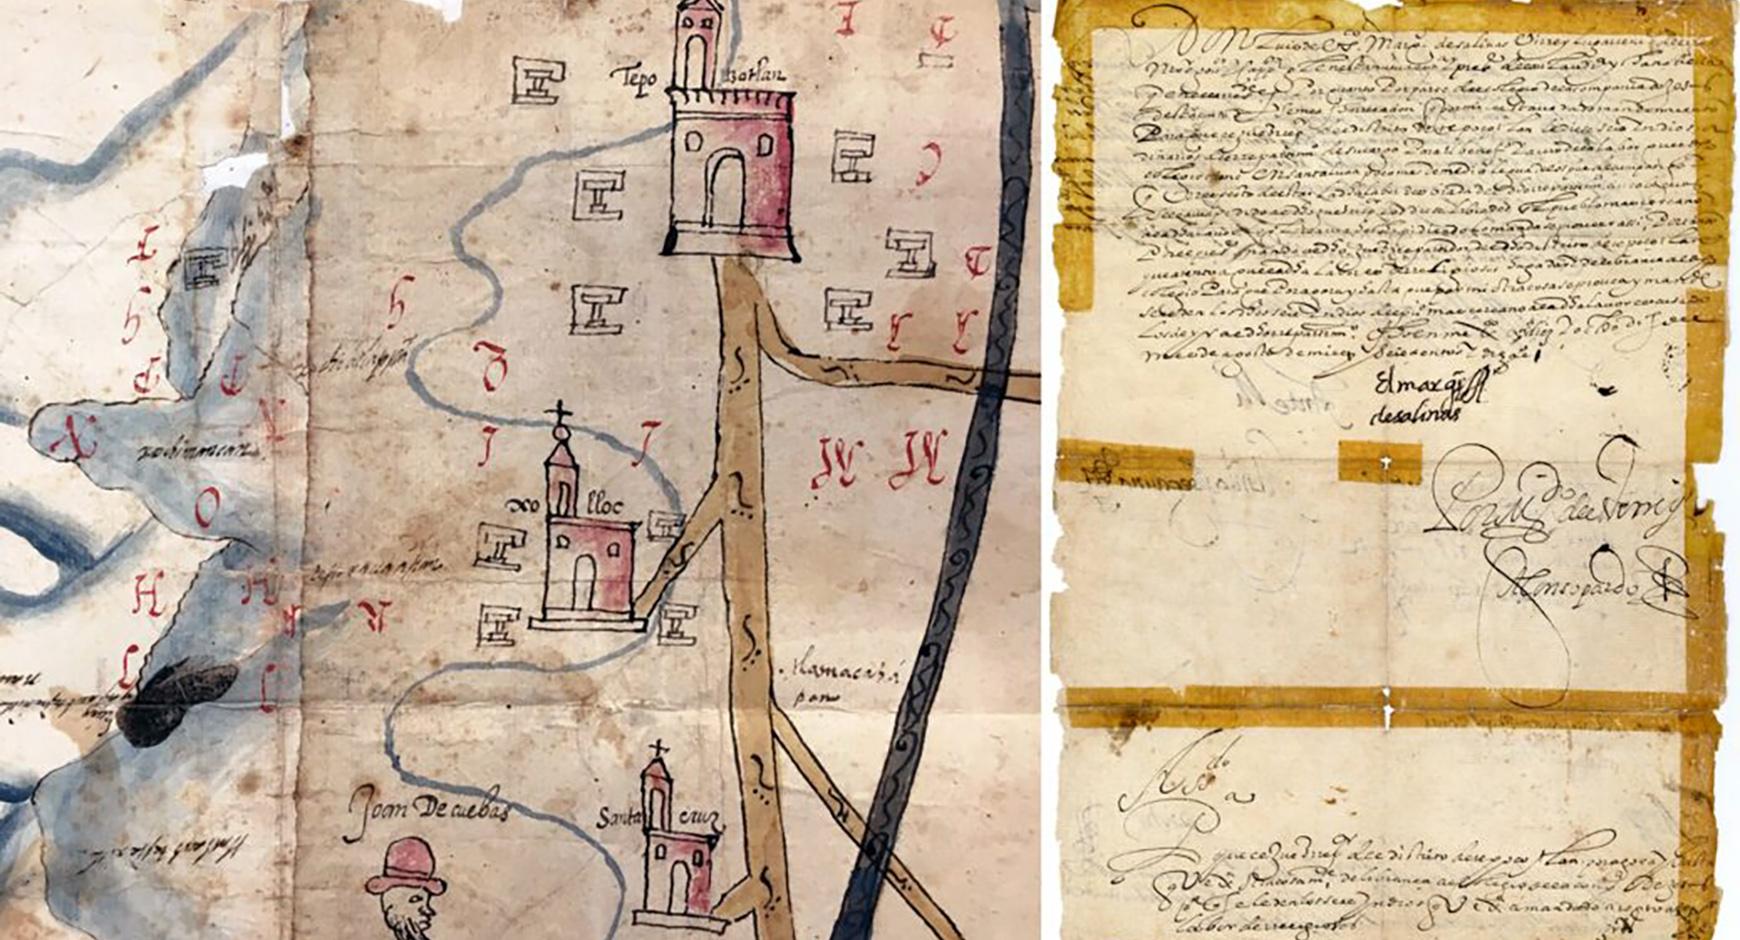 Pictorial representation of the lands owned by the Jesuit College of Tepozotlán, circa 1600–1625 (left). Viceregal decree ordering Tepozotlán’s repartidor to provide the Jesuit college with Native laborers, August 18, 1610 (right). Edmundo O’Gorman Collection